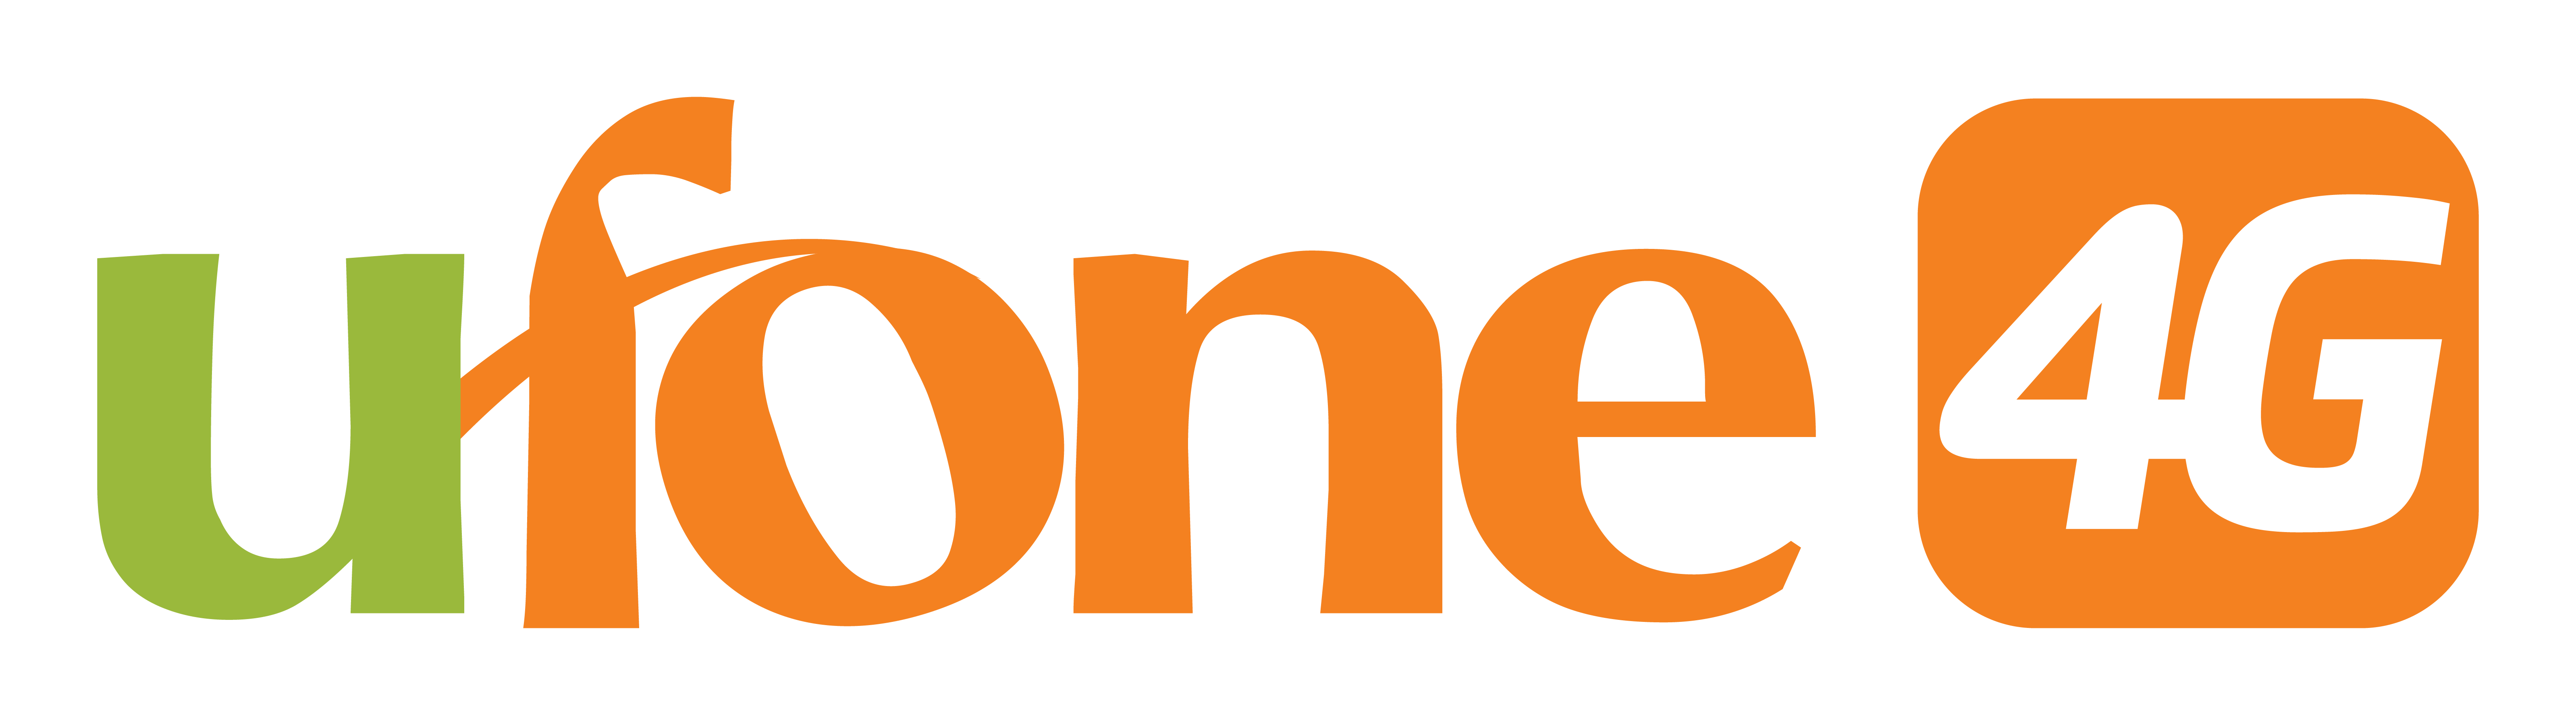 Ufone 4G gets globals recognition for its superior 4G services